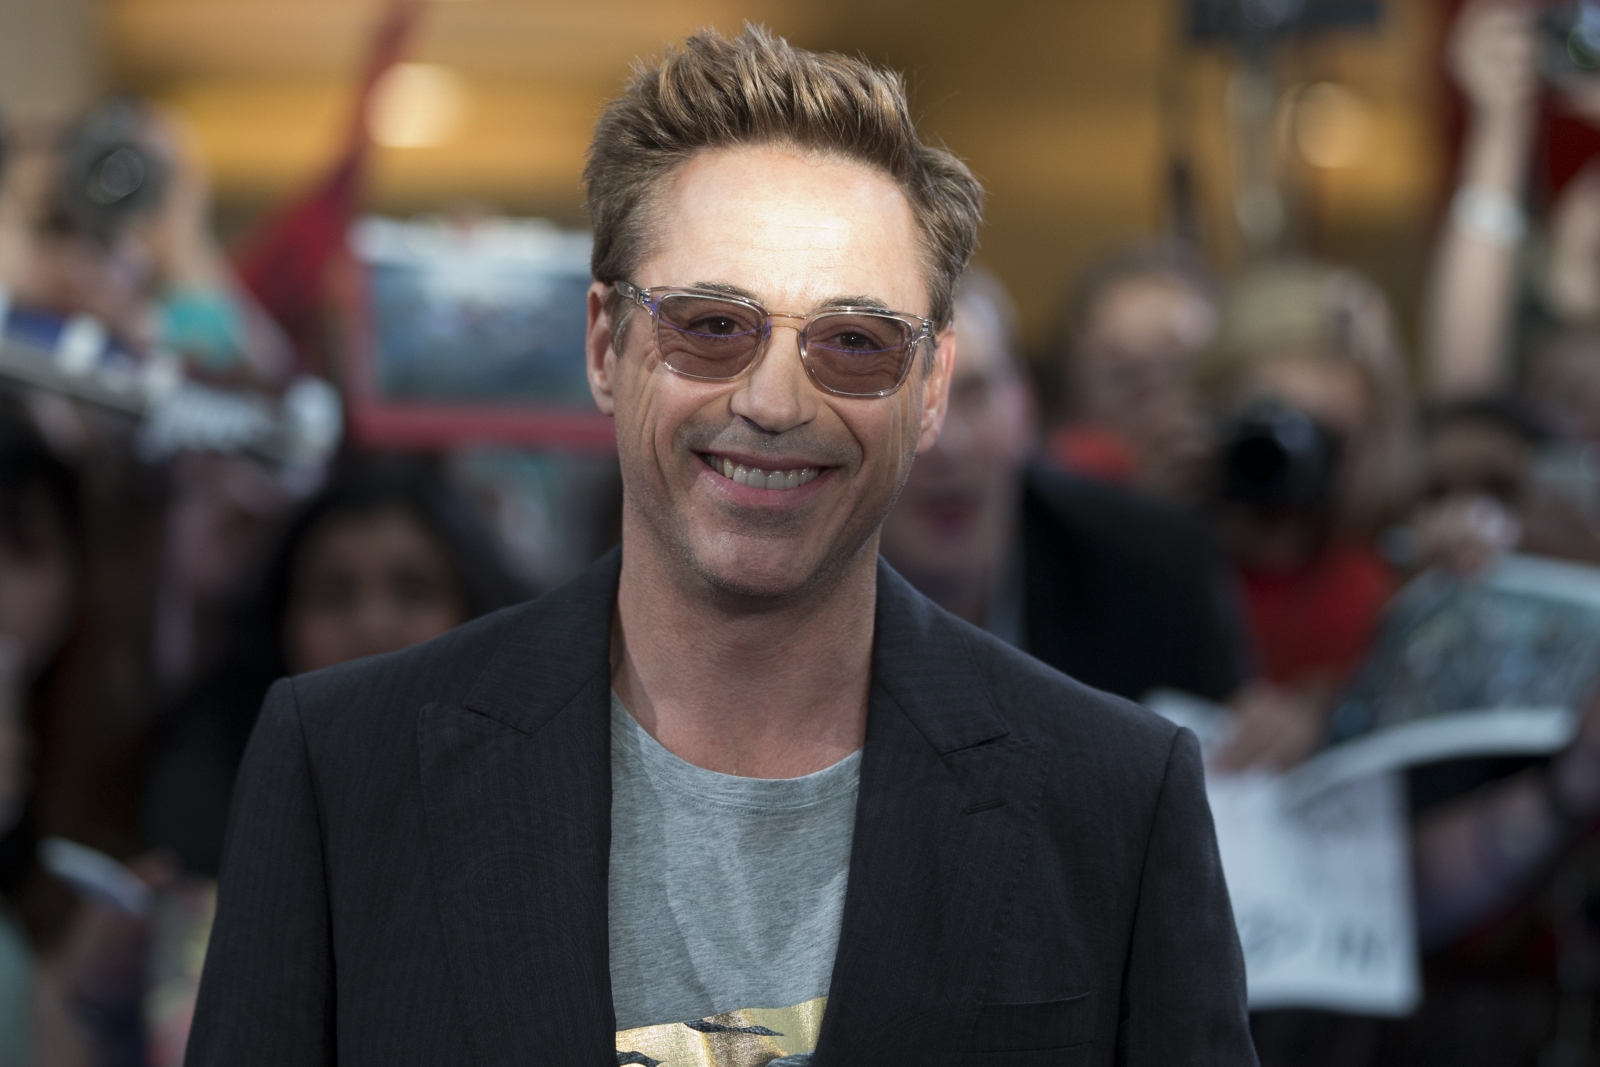 Robert Downey Jr named highest-paid actor at $80m.